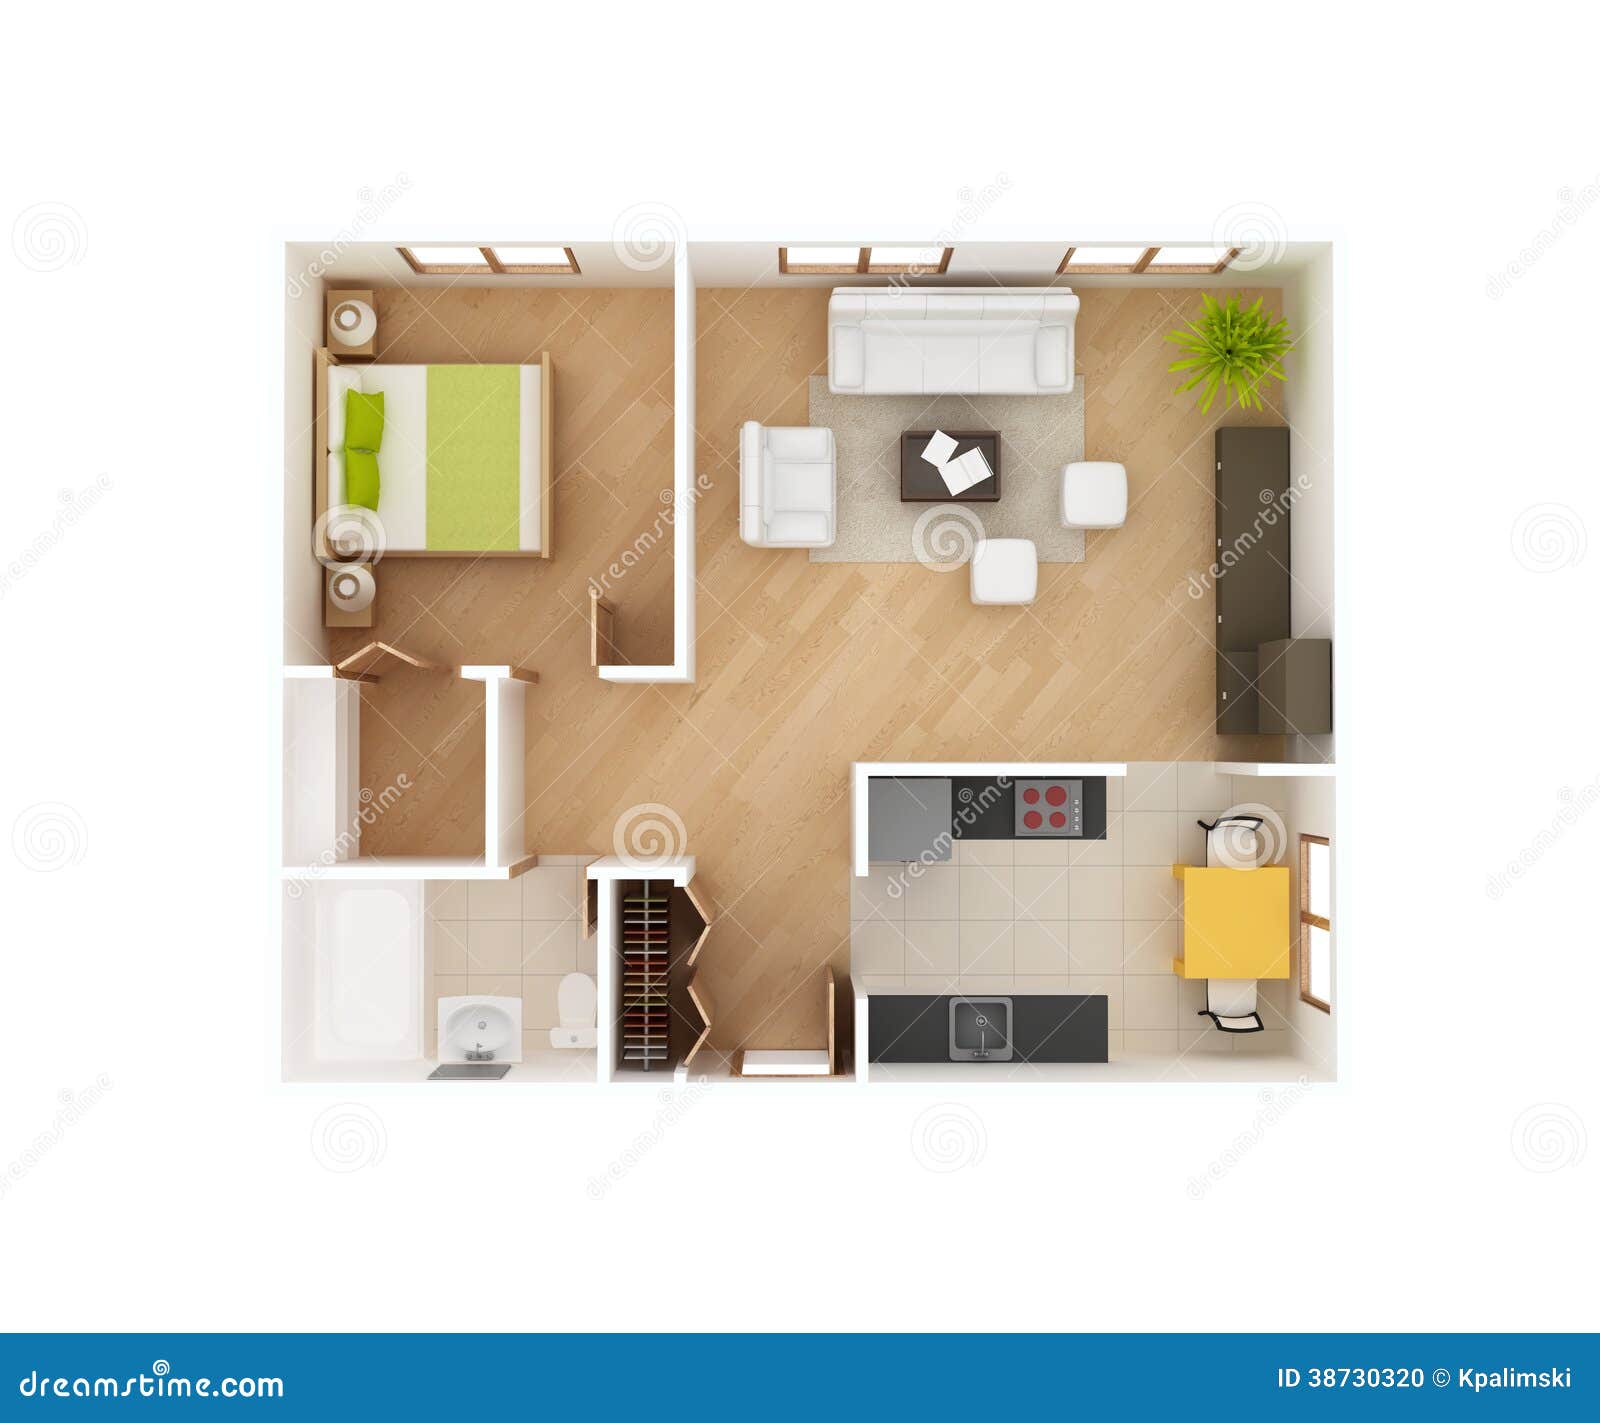 Stock Photo: Basic 3D house floor plan top view